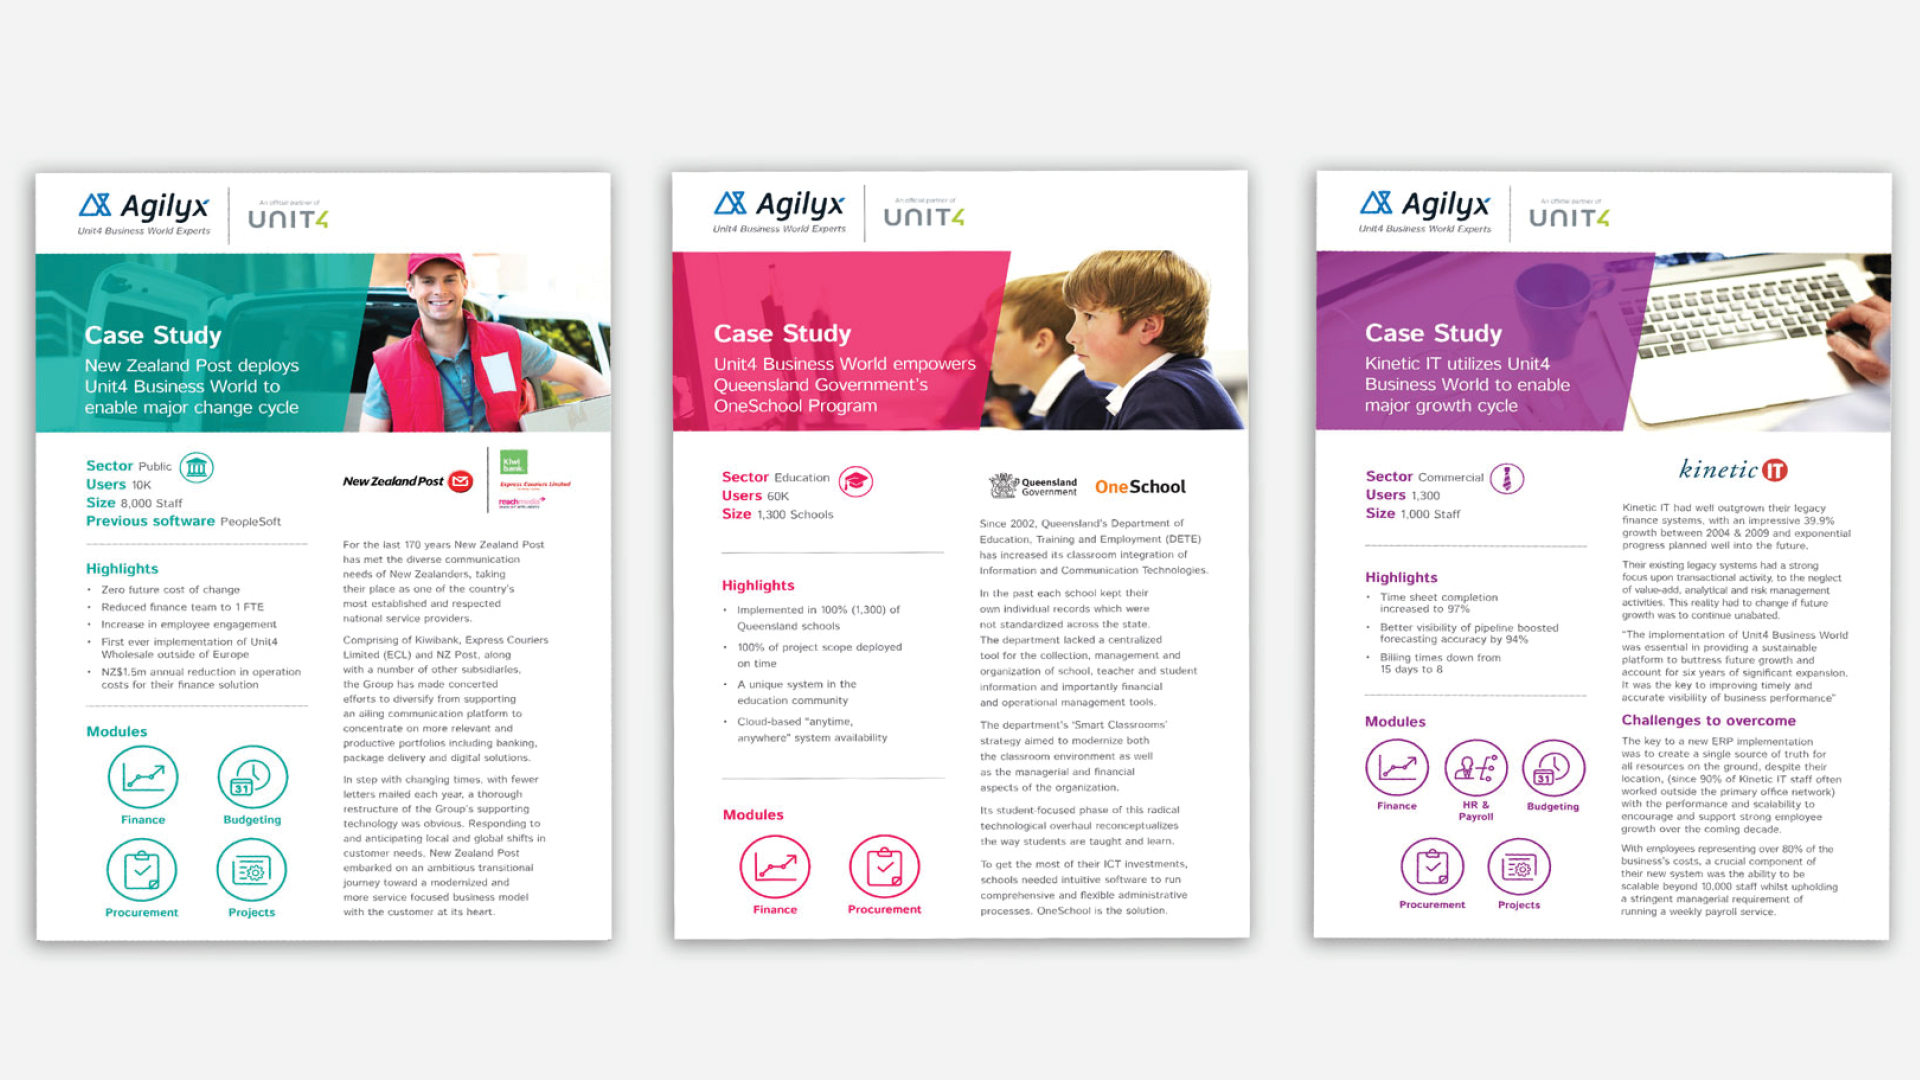 Agilyx Marketing Collateral by Think creative agency